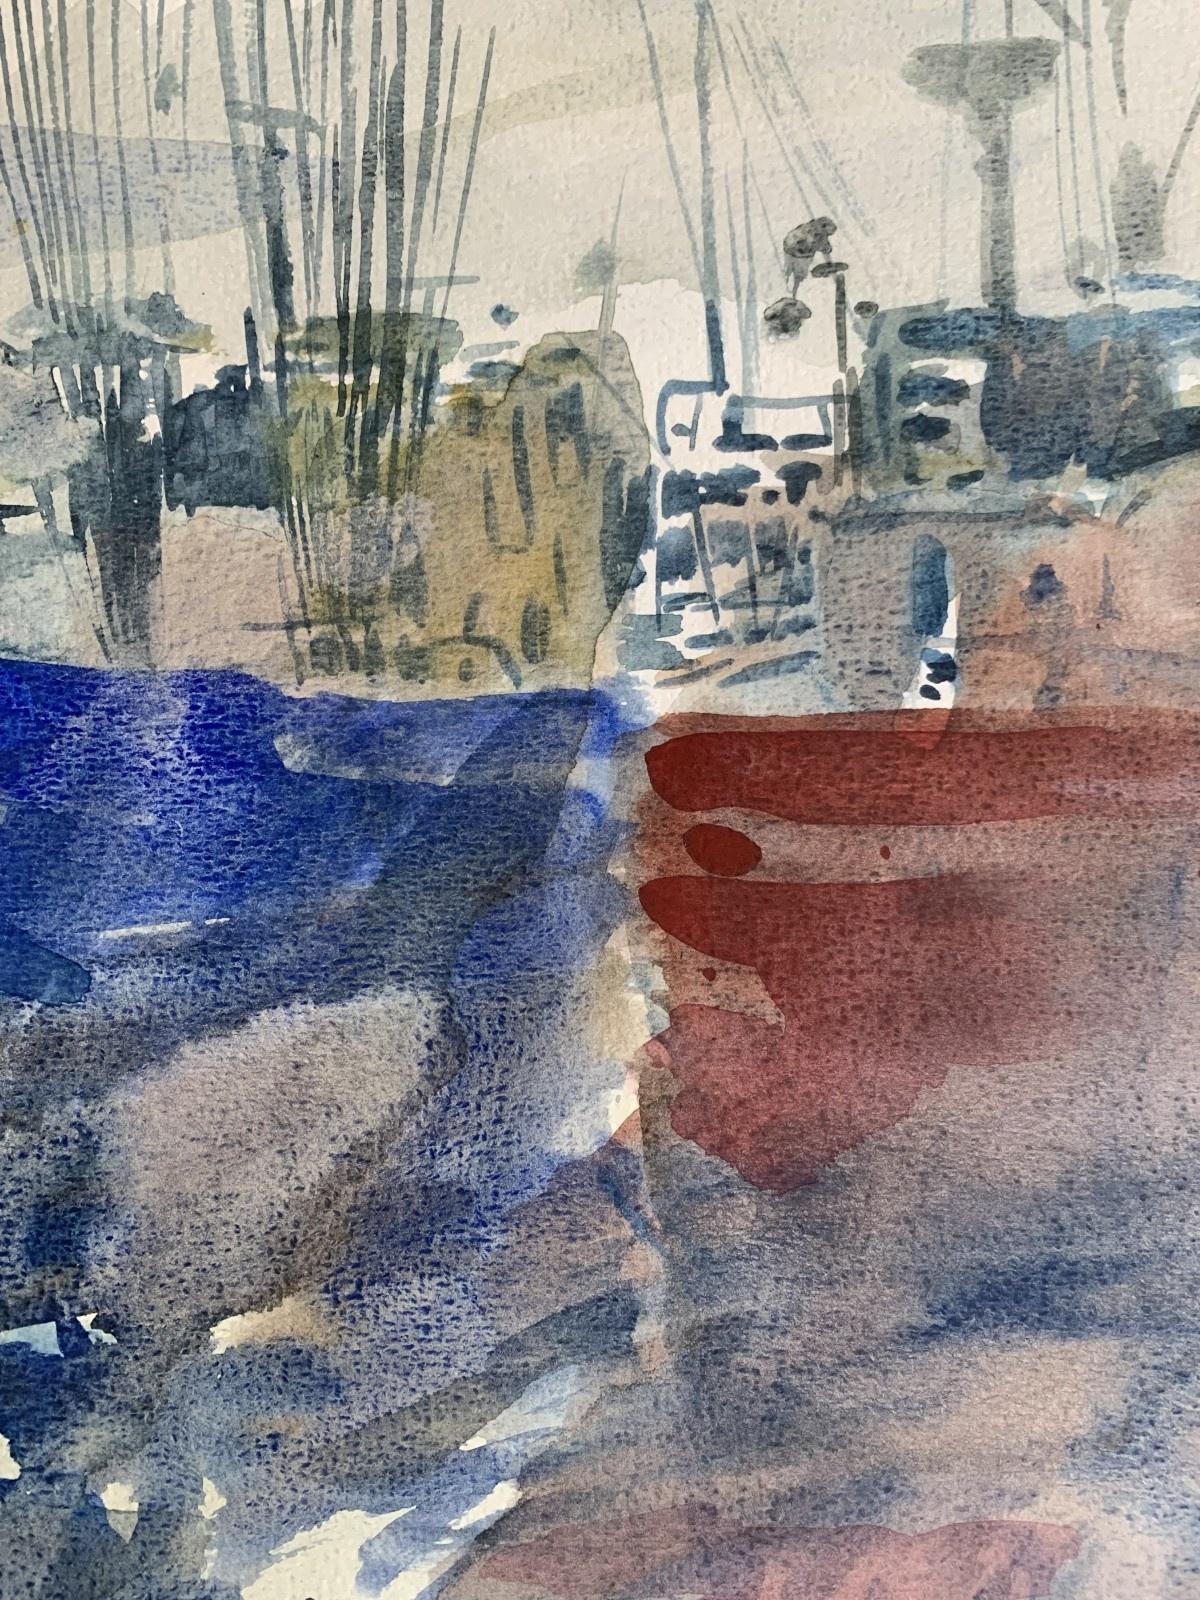 Contemporary watercolor painting on paper by Polish artist Wlodzimierz Karczmarzyk. Marine painting depicting boats on a water. Artwork's style is sketch-like but realistic at the same time.

WŁODZIMIERZ KARCZMARZYK (born in 1930) Painter and an